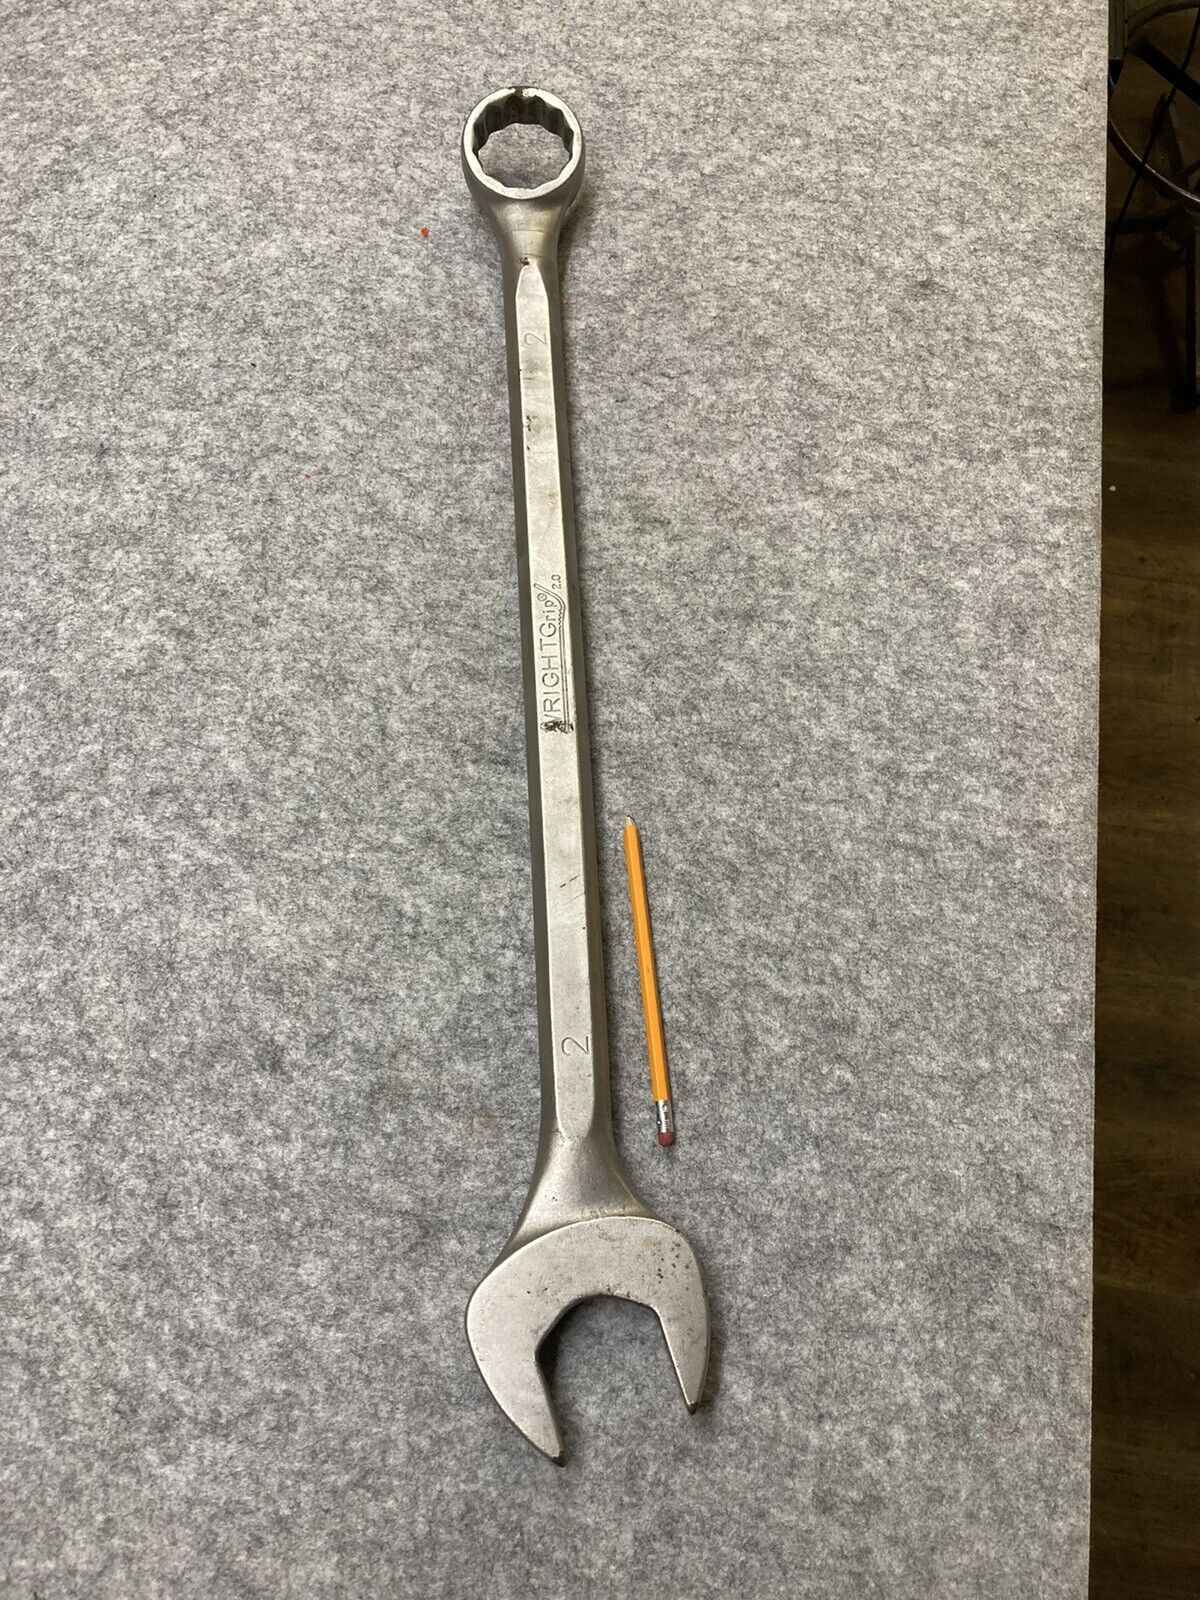 wright grip 2”Combination wrench thick handle #1164